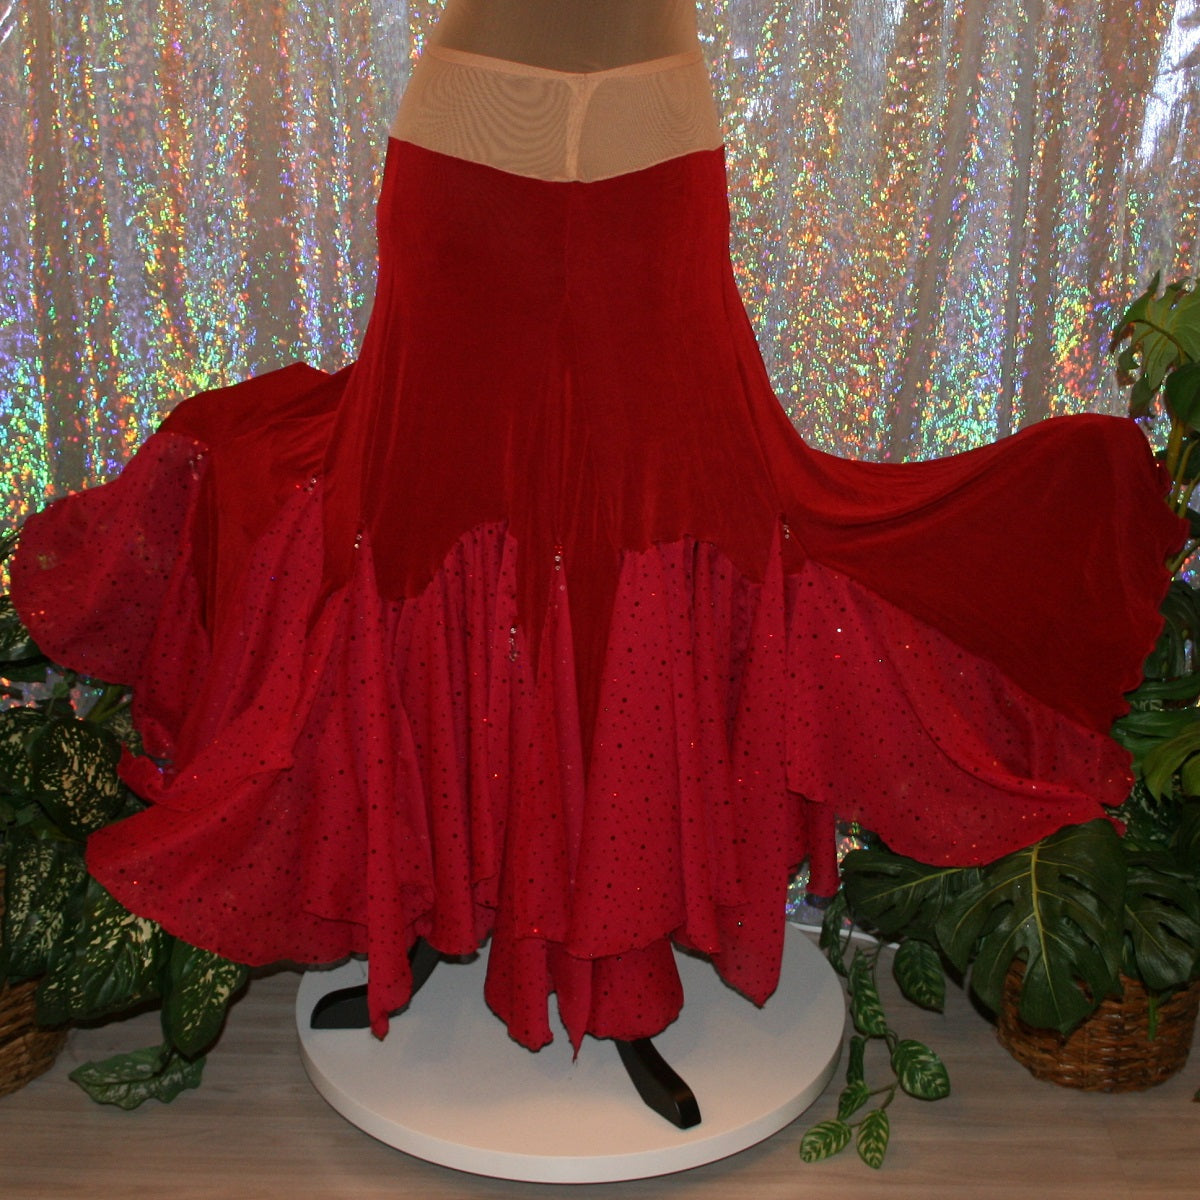 back view of Scarlet red ballroom dance skirt created of luxurious scarlet red solid slinky with insets & floats of scarlet red champagne sequined chiffon with a touch of Swarovski hand beading.